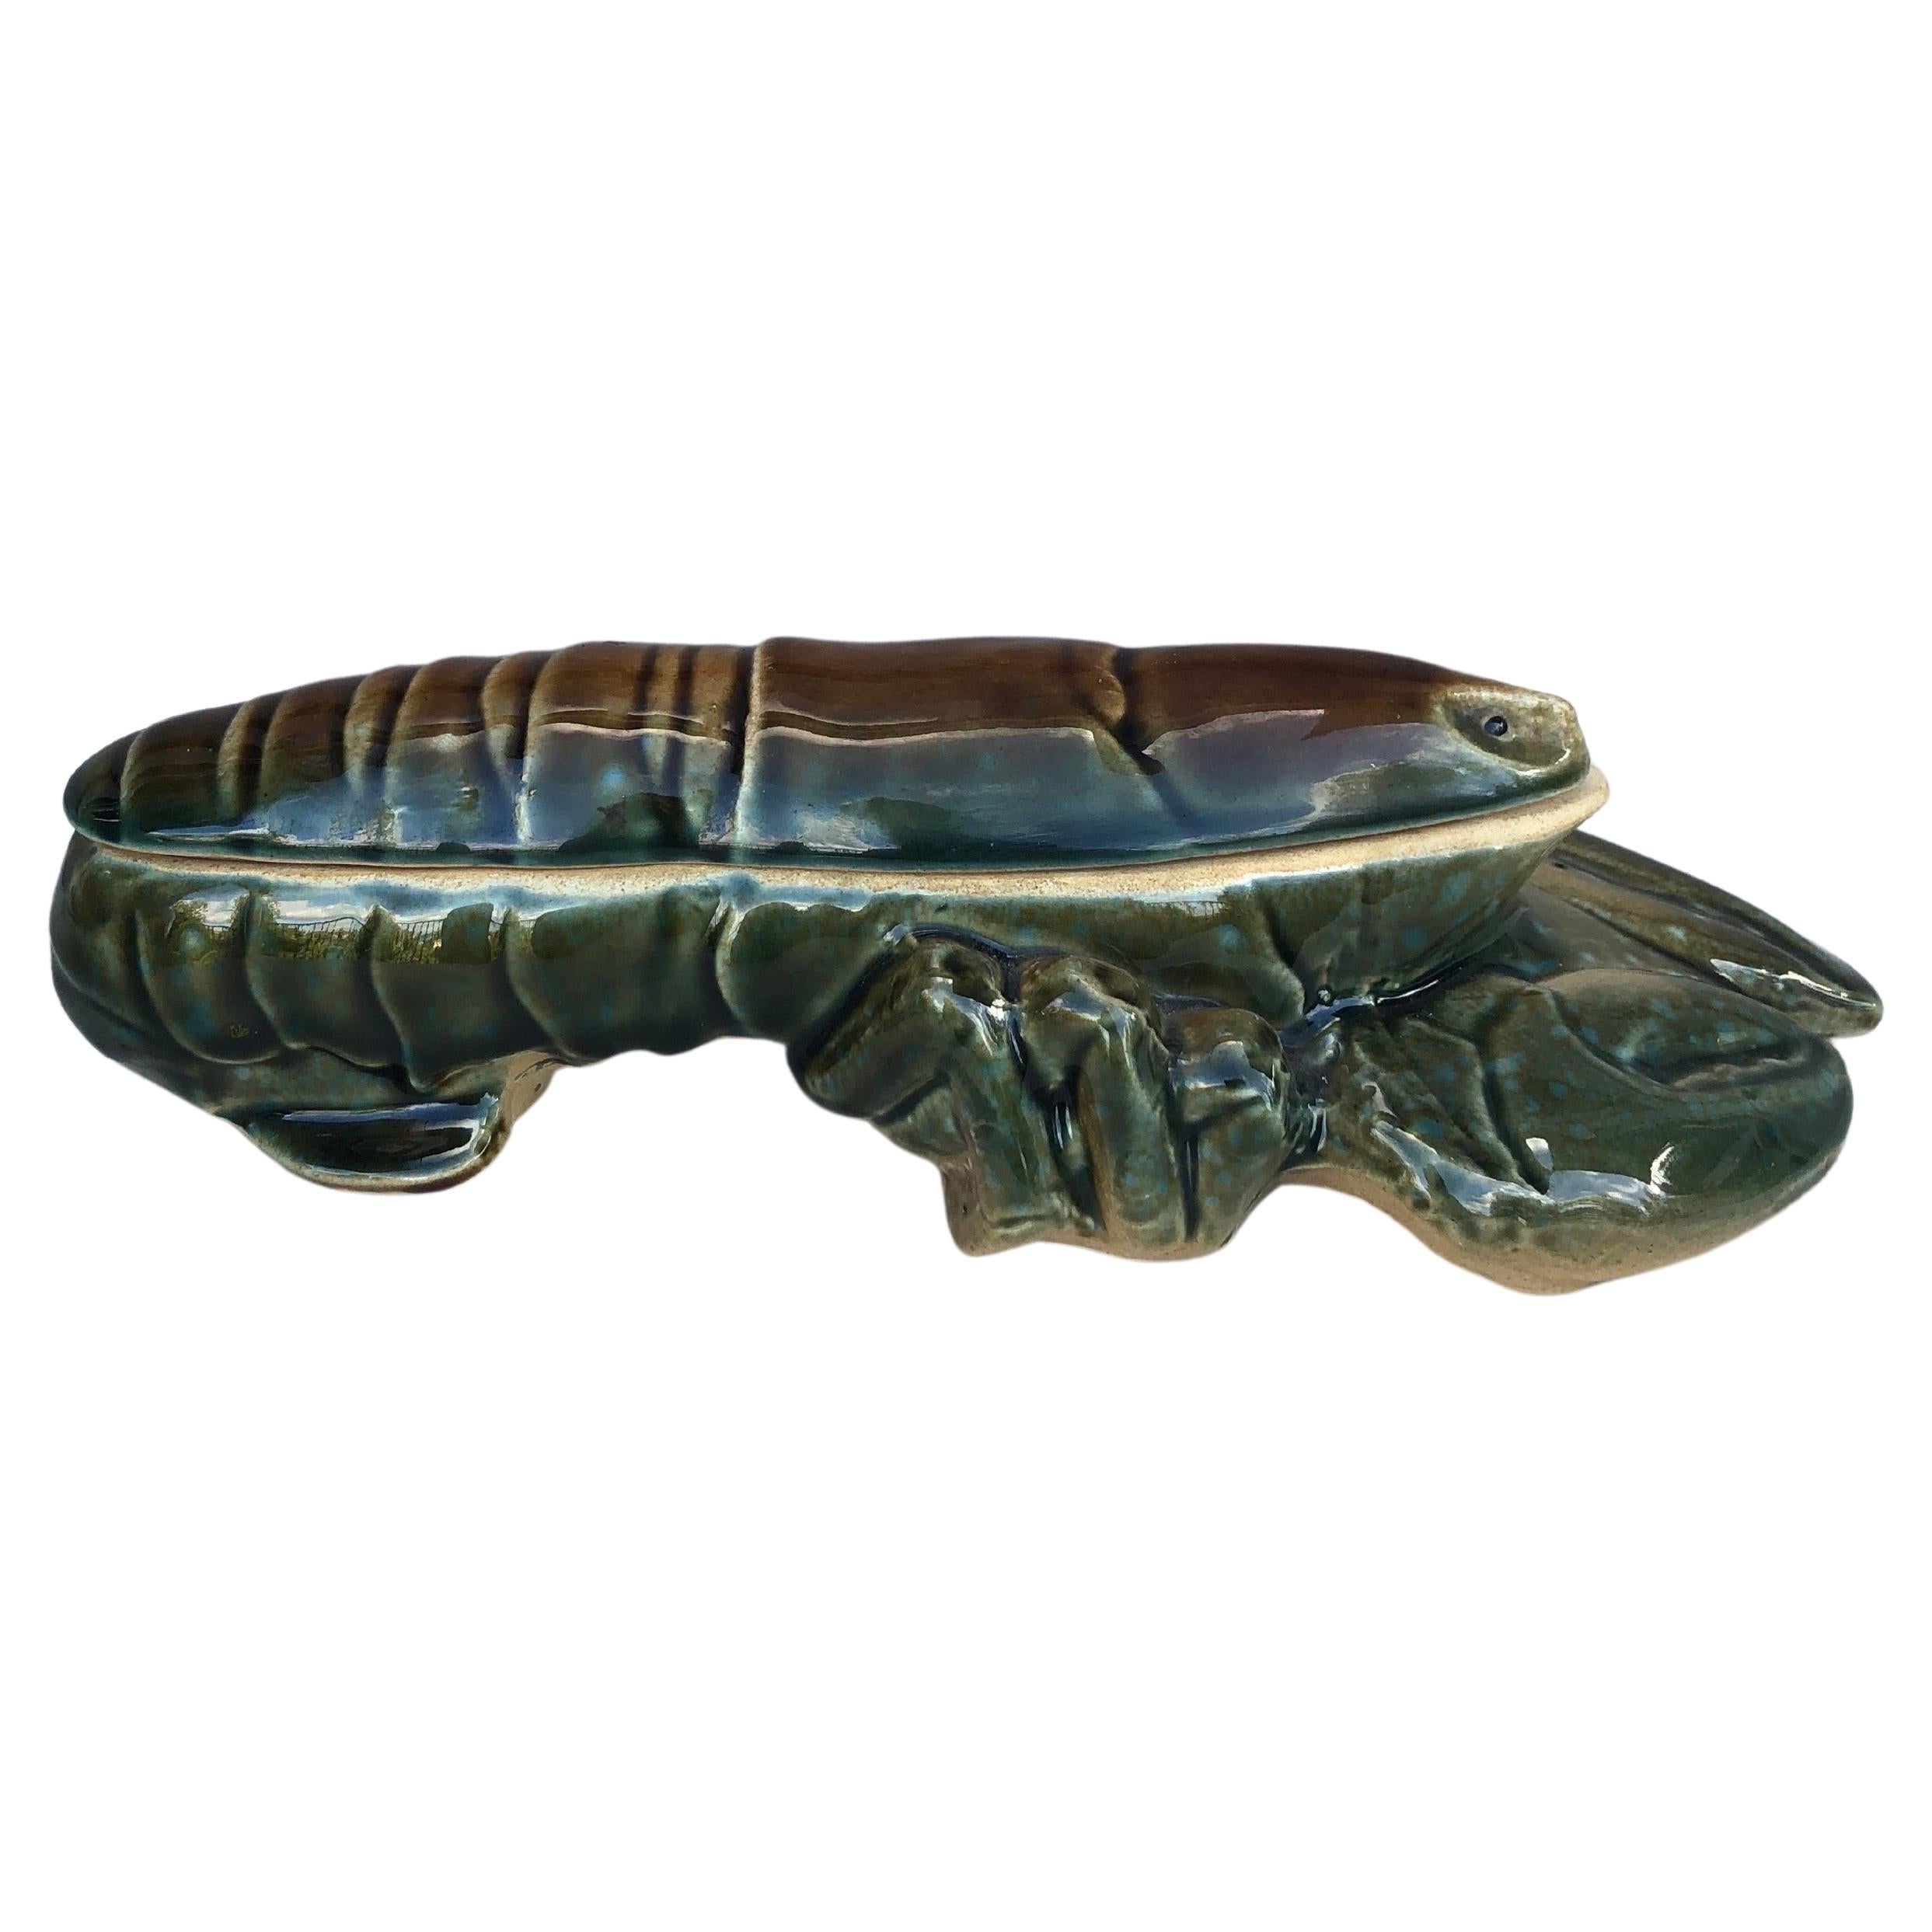 Large French Majolica lobster tureen or box with green glaze, circa 1950.